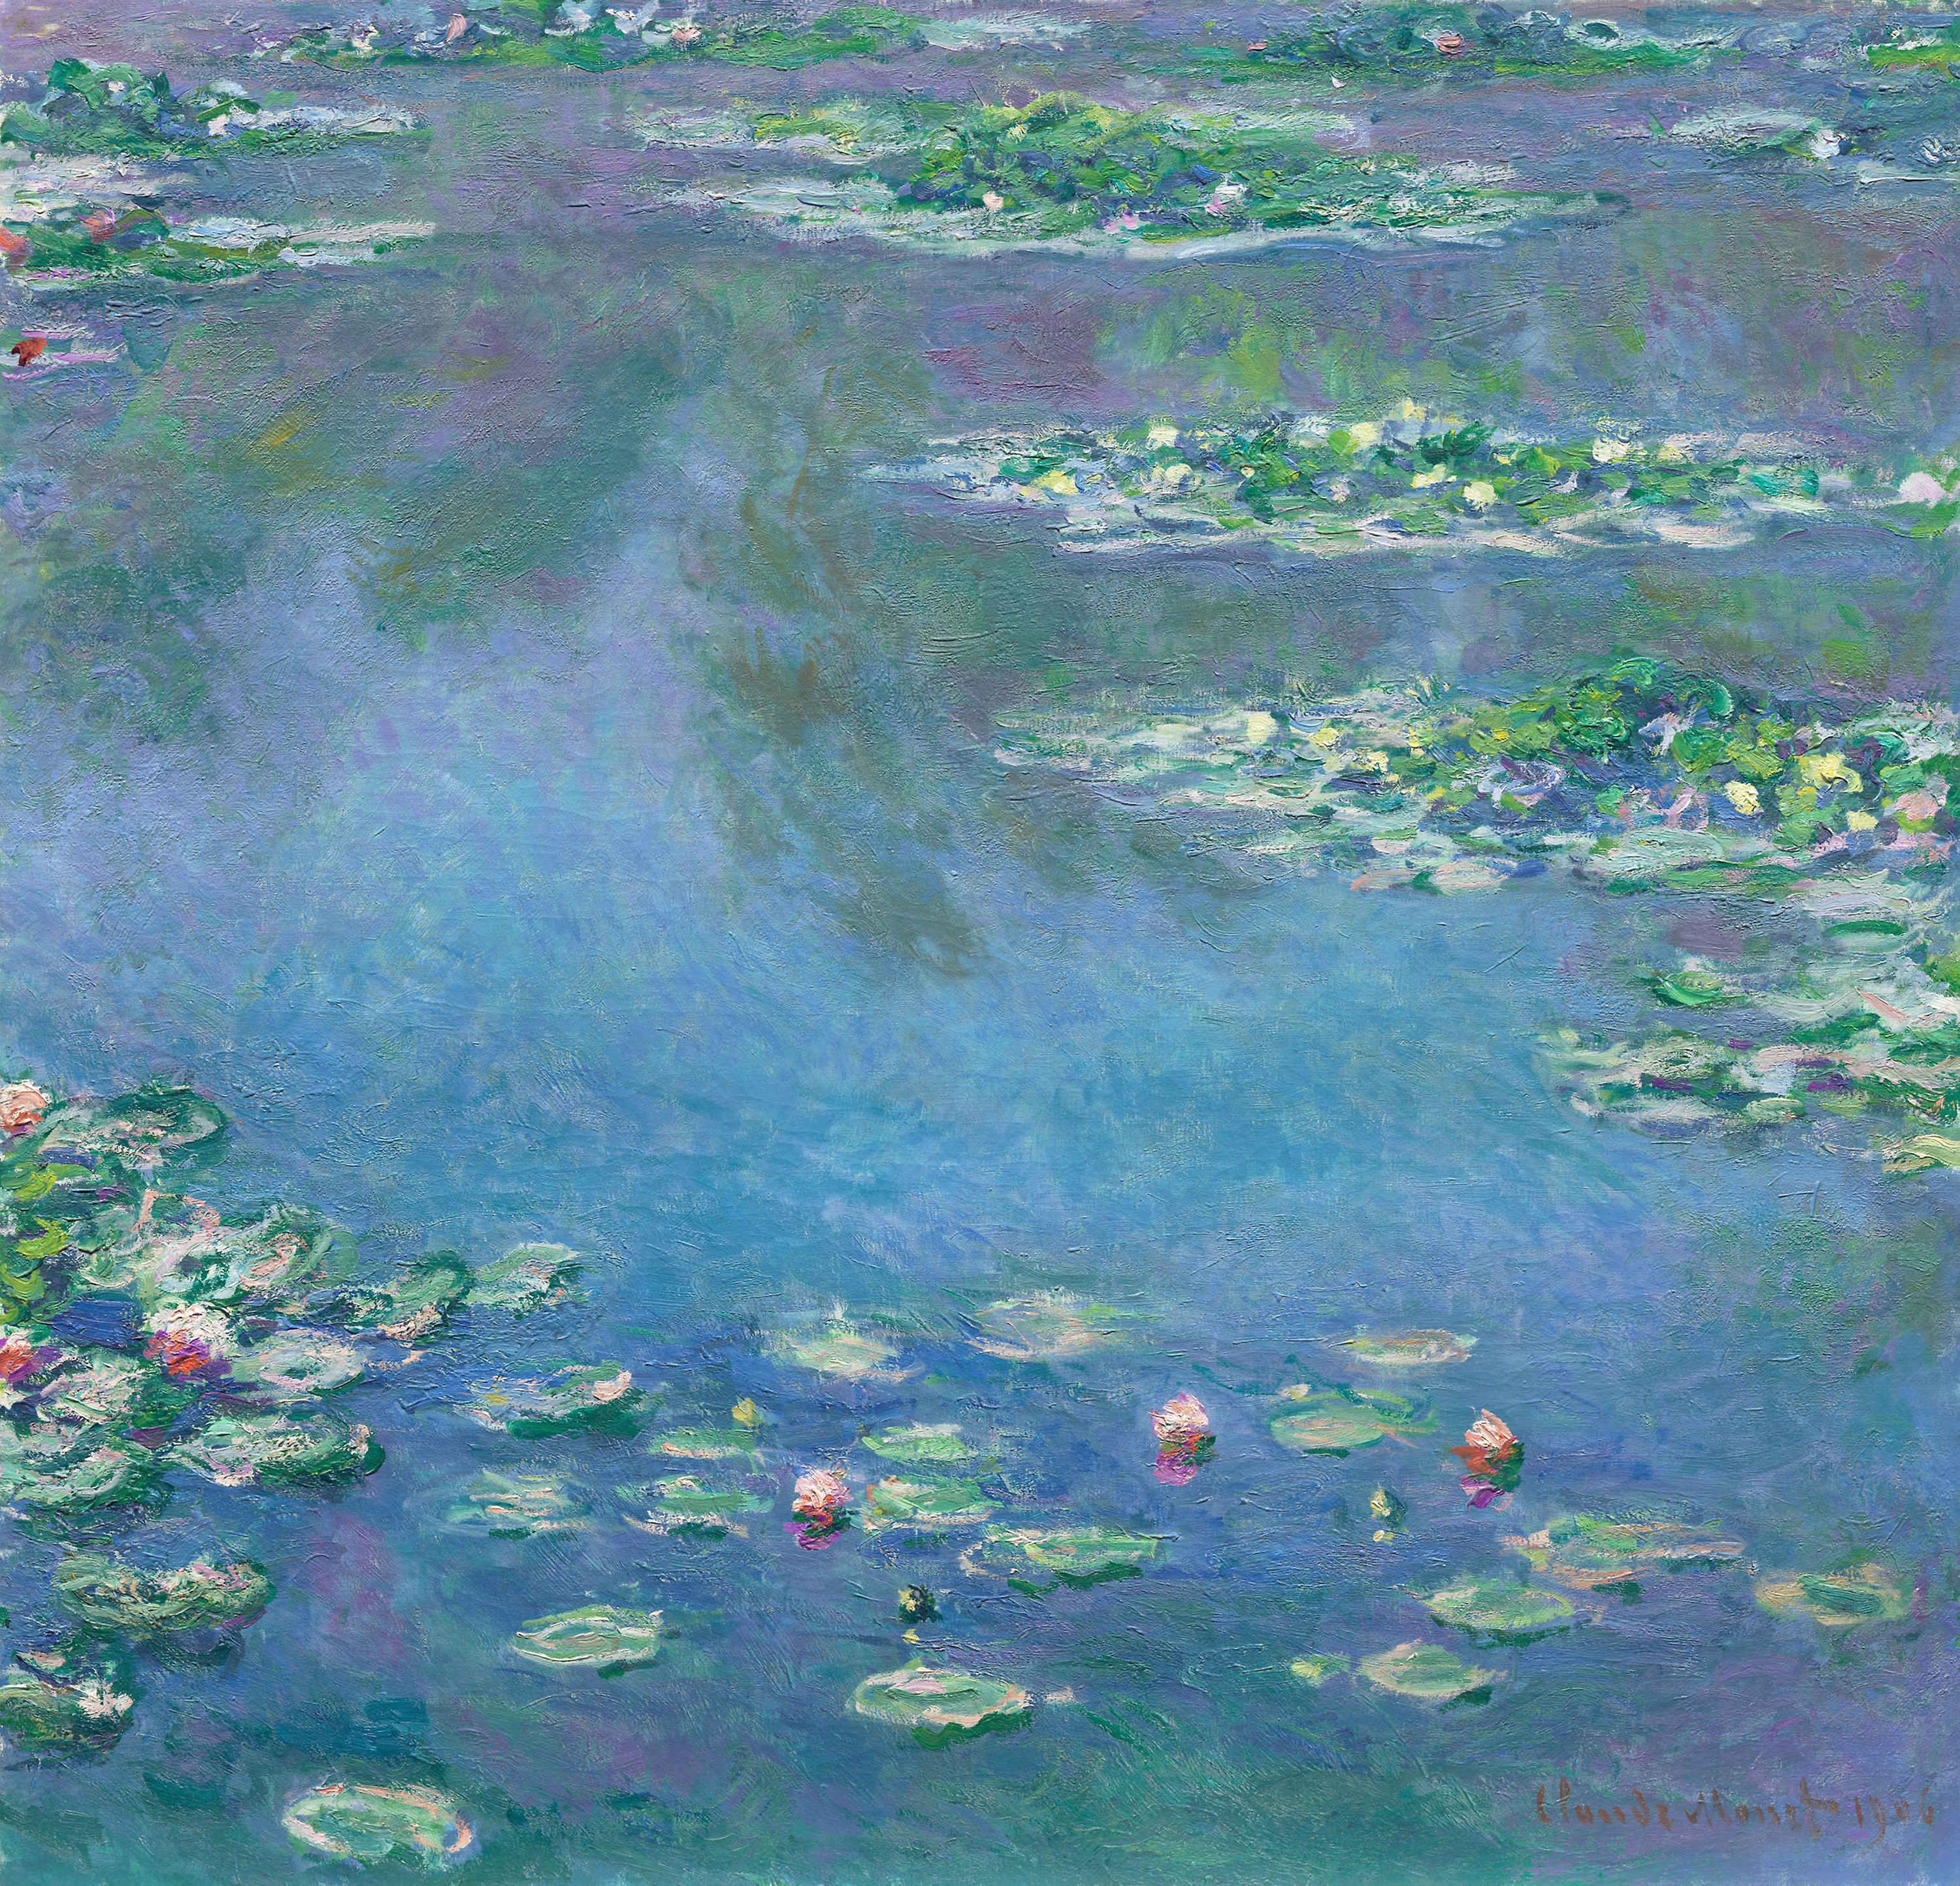 painting in the style of monet